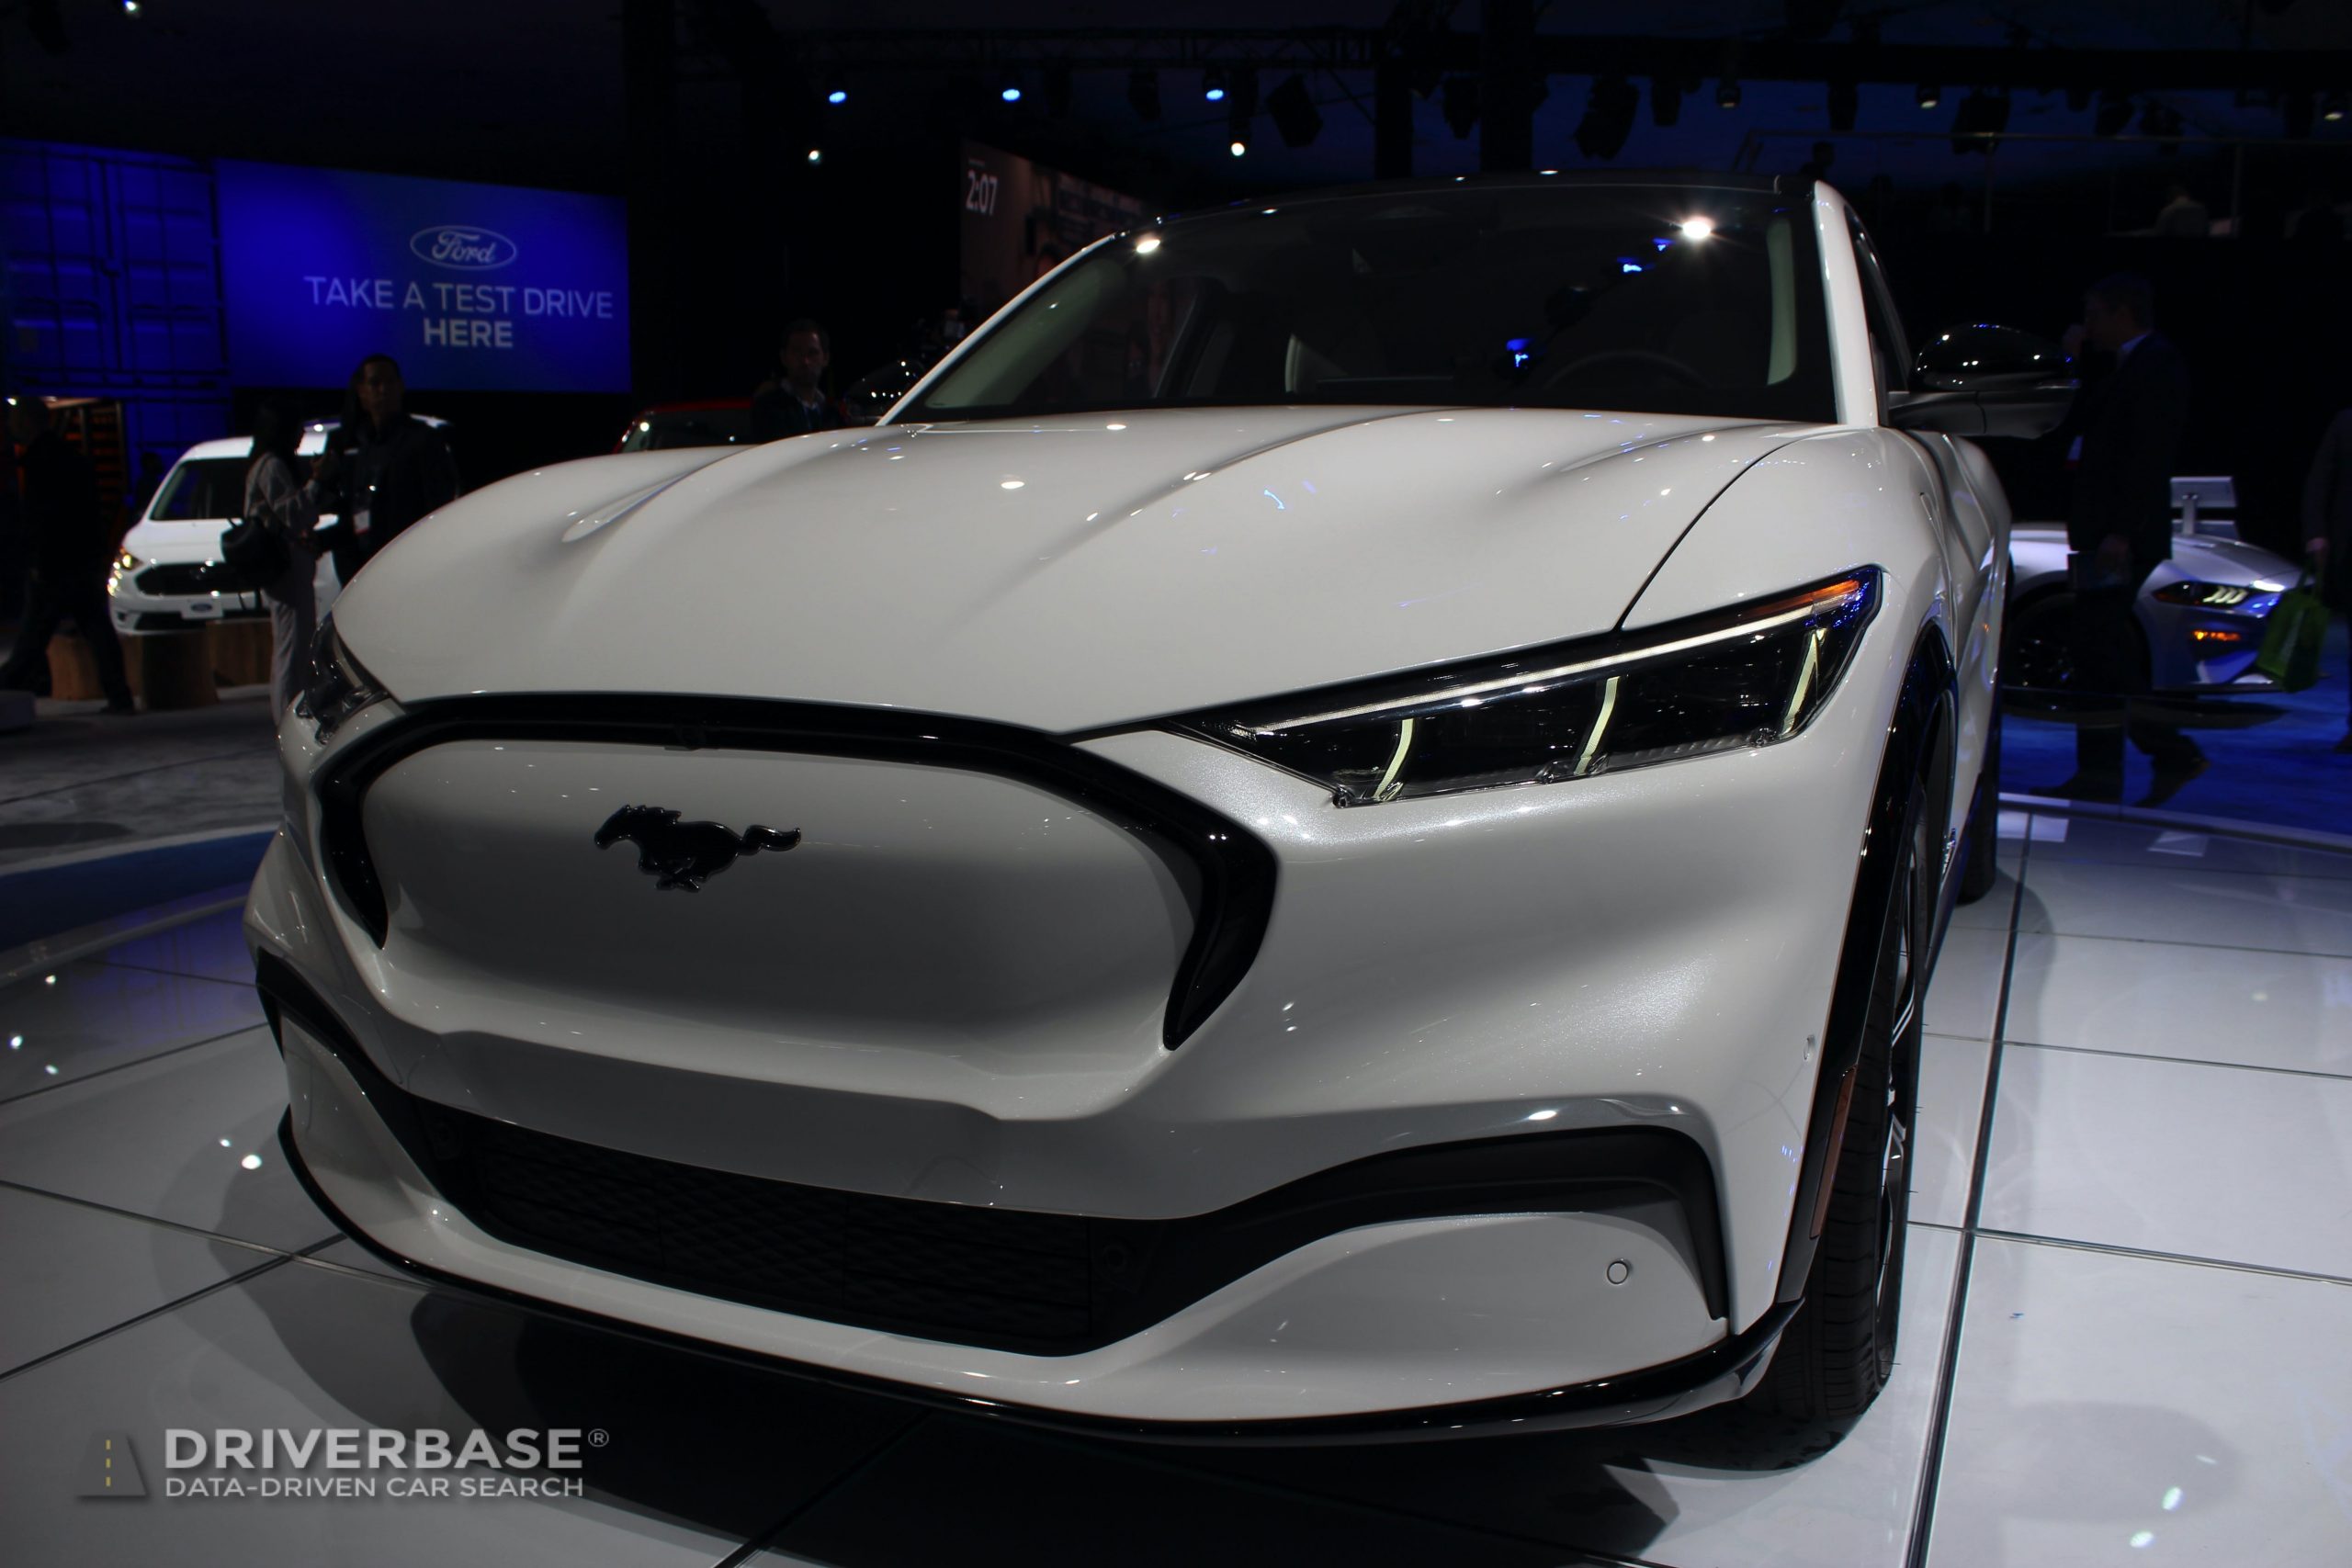 2021 Ford Mustang Mach-E Electric SUV Launch at the 2019 Los Angeles Auto Show